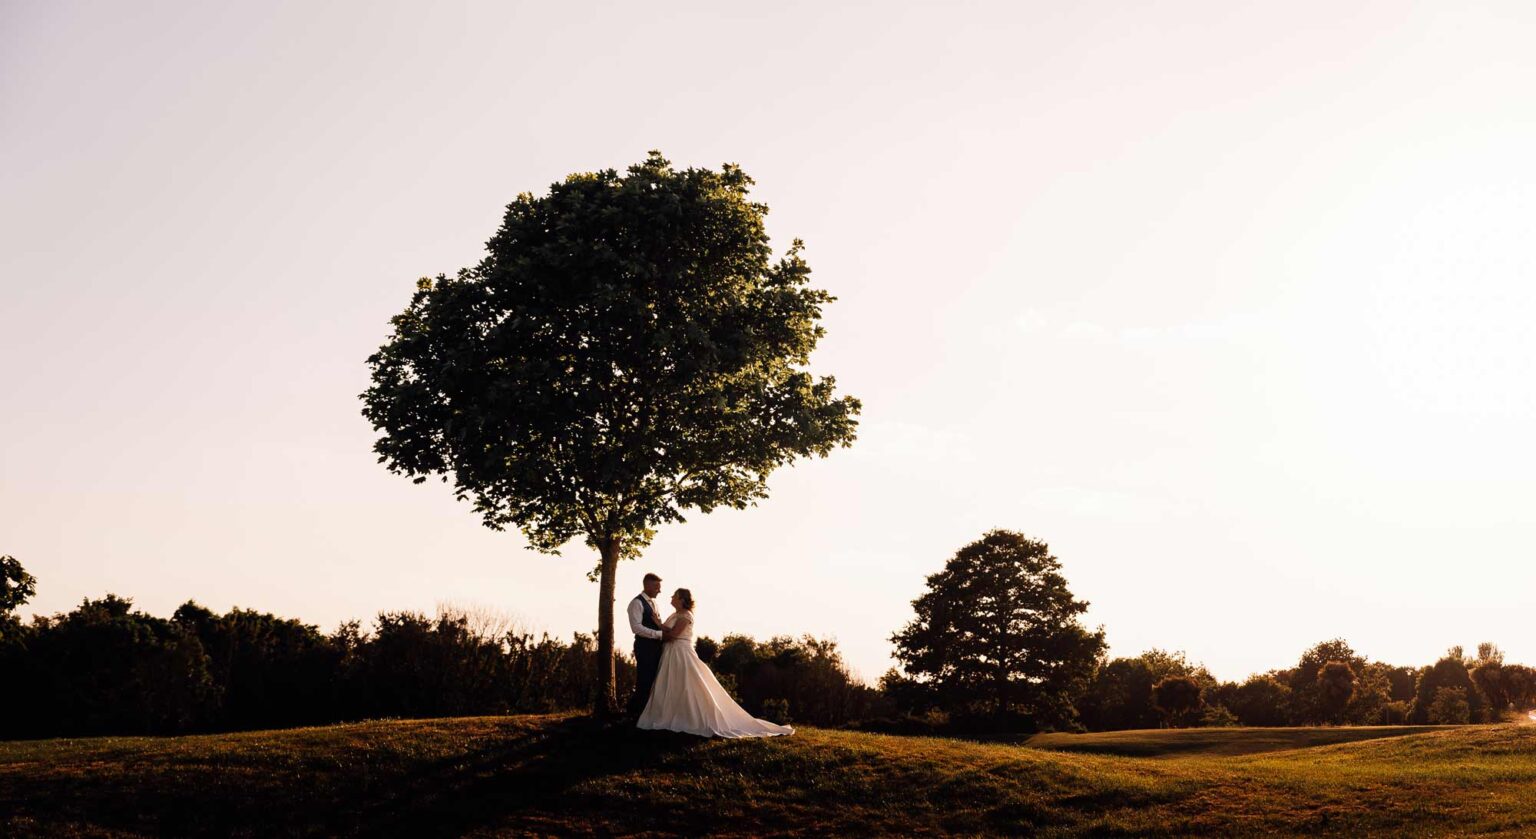 Bride and Groom embracing under an old oak tree